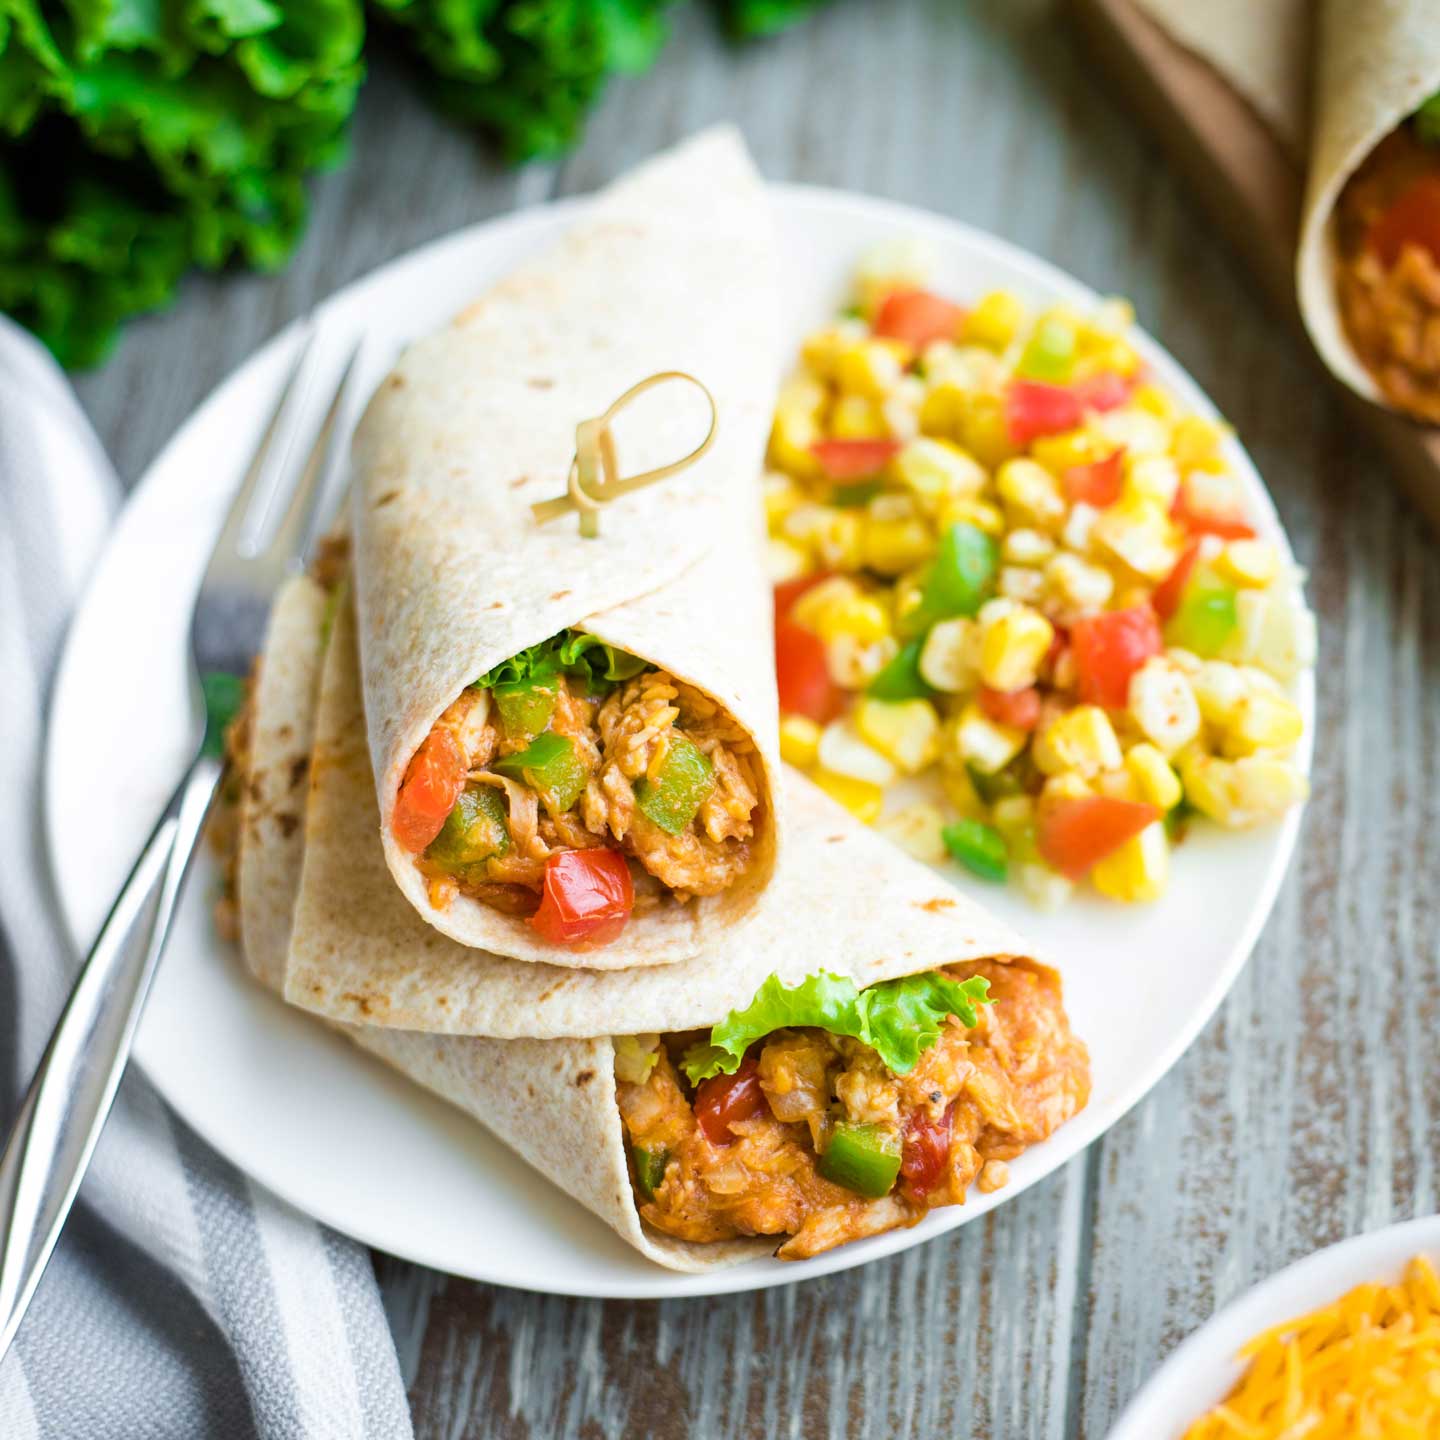 chicken tortilla wrap, cut in half and stacked on dinner plate, along with fork and corn salad